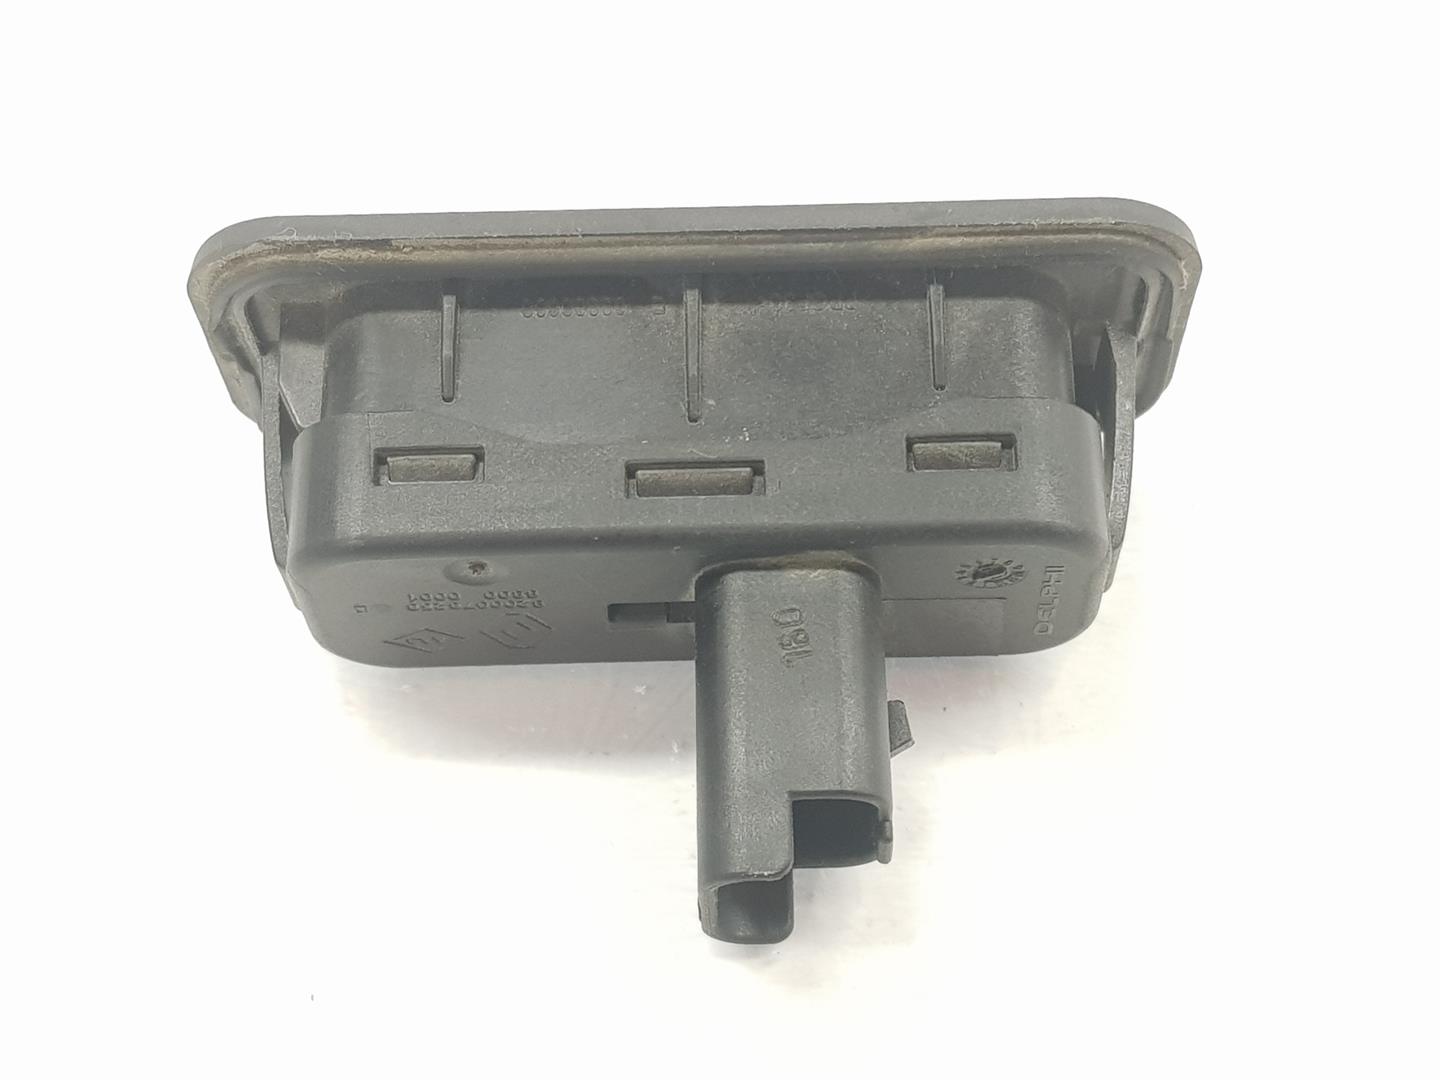 RENAULT Scenic 3 generation (2009-2015) Other Body Parts 8200076256, 8200076256 24207613